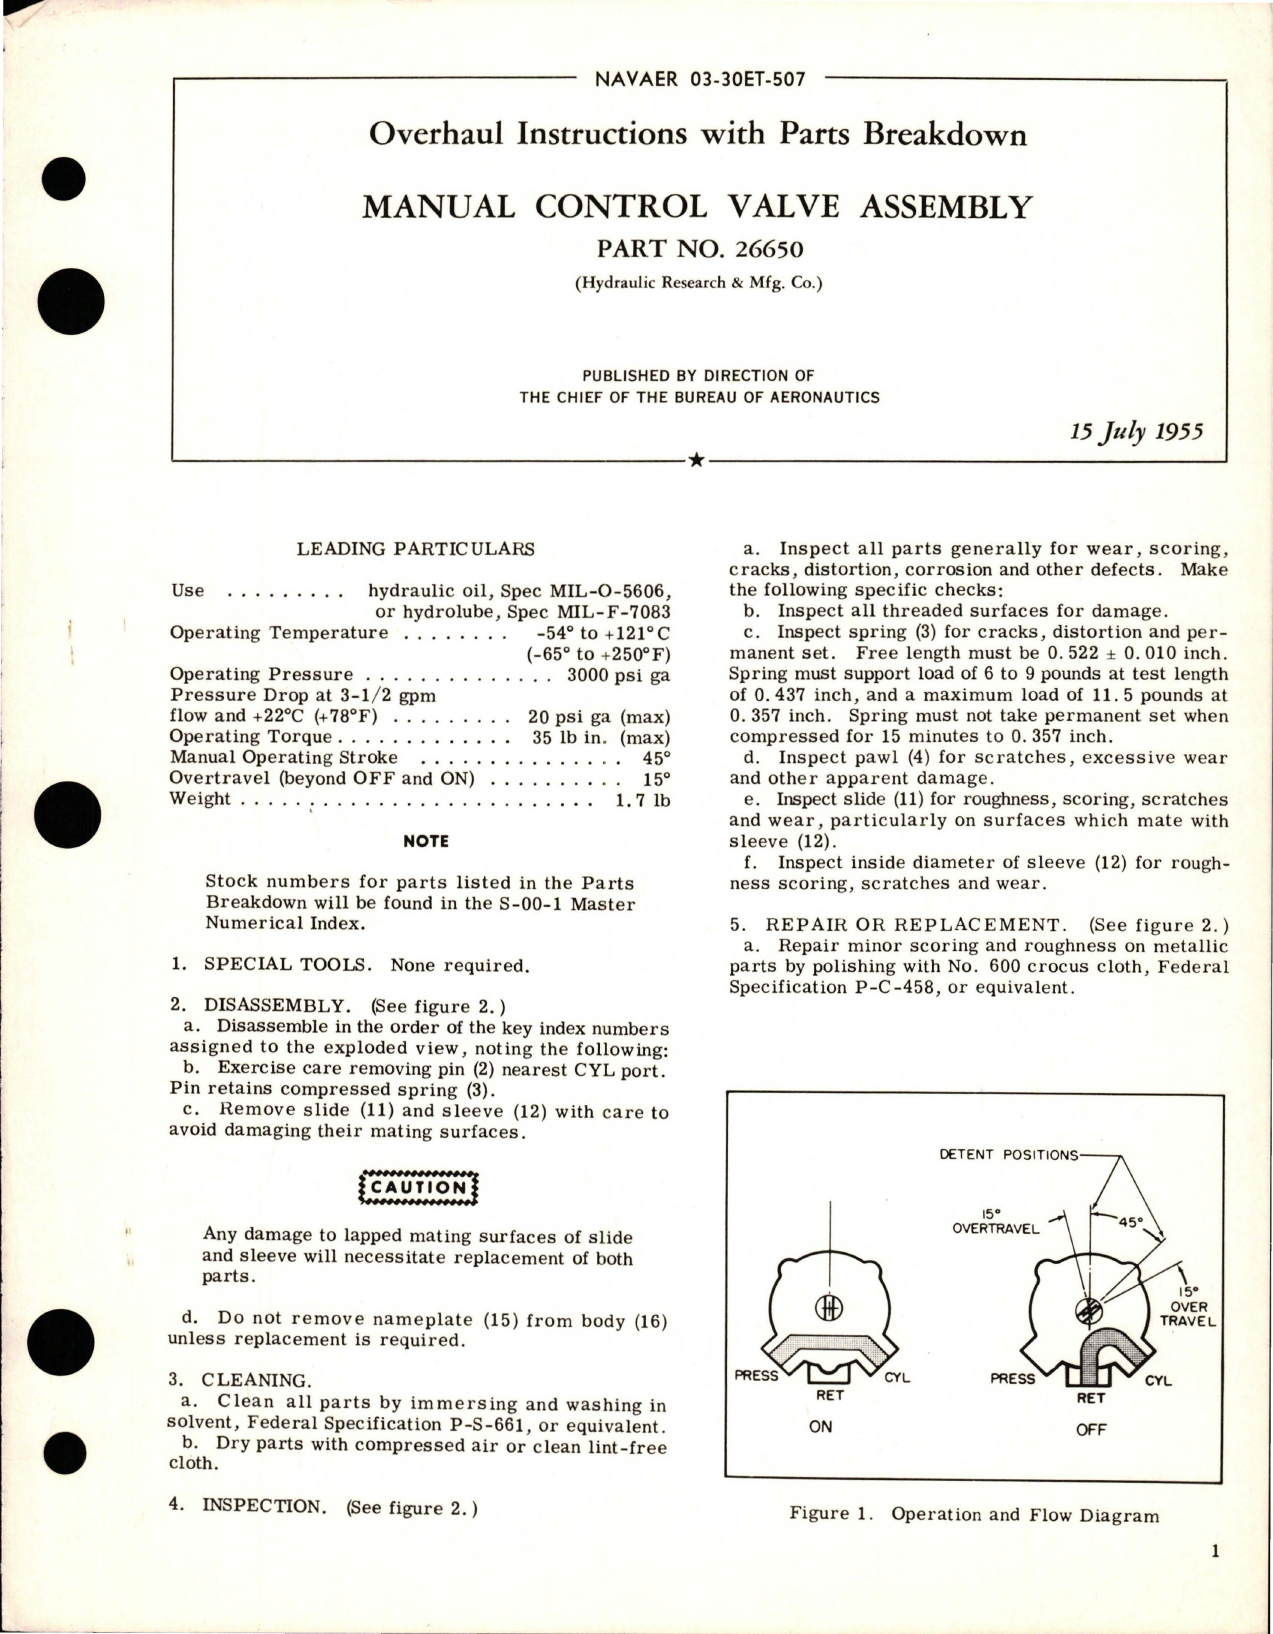 Sample page 1 from AirCorps Library document: Overhaul Instructions with Parts Breakdown for Manual Control Valve Assembly - Part 26650